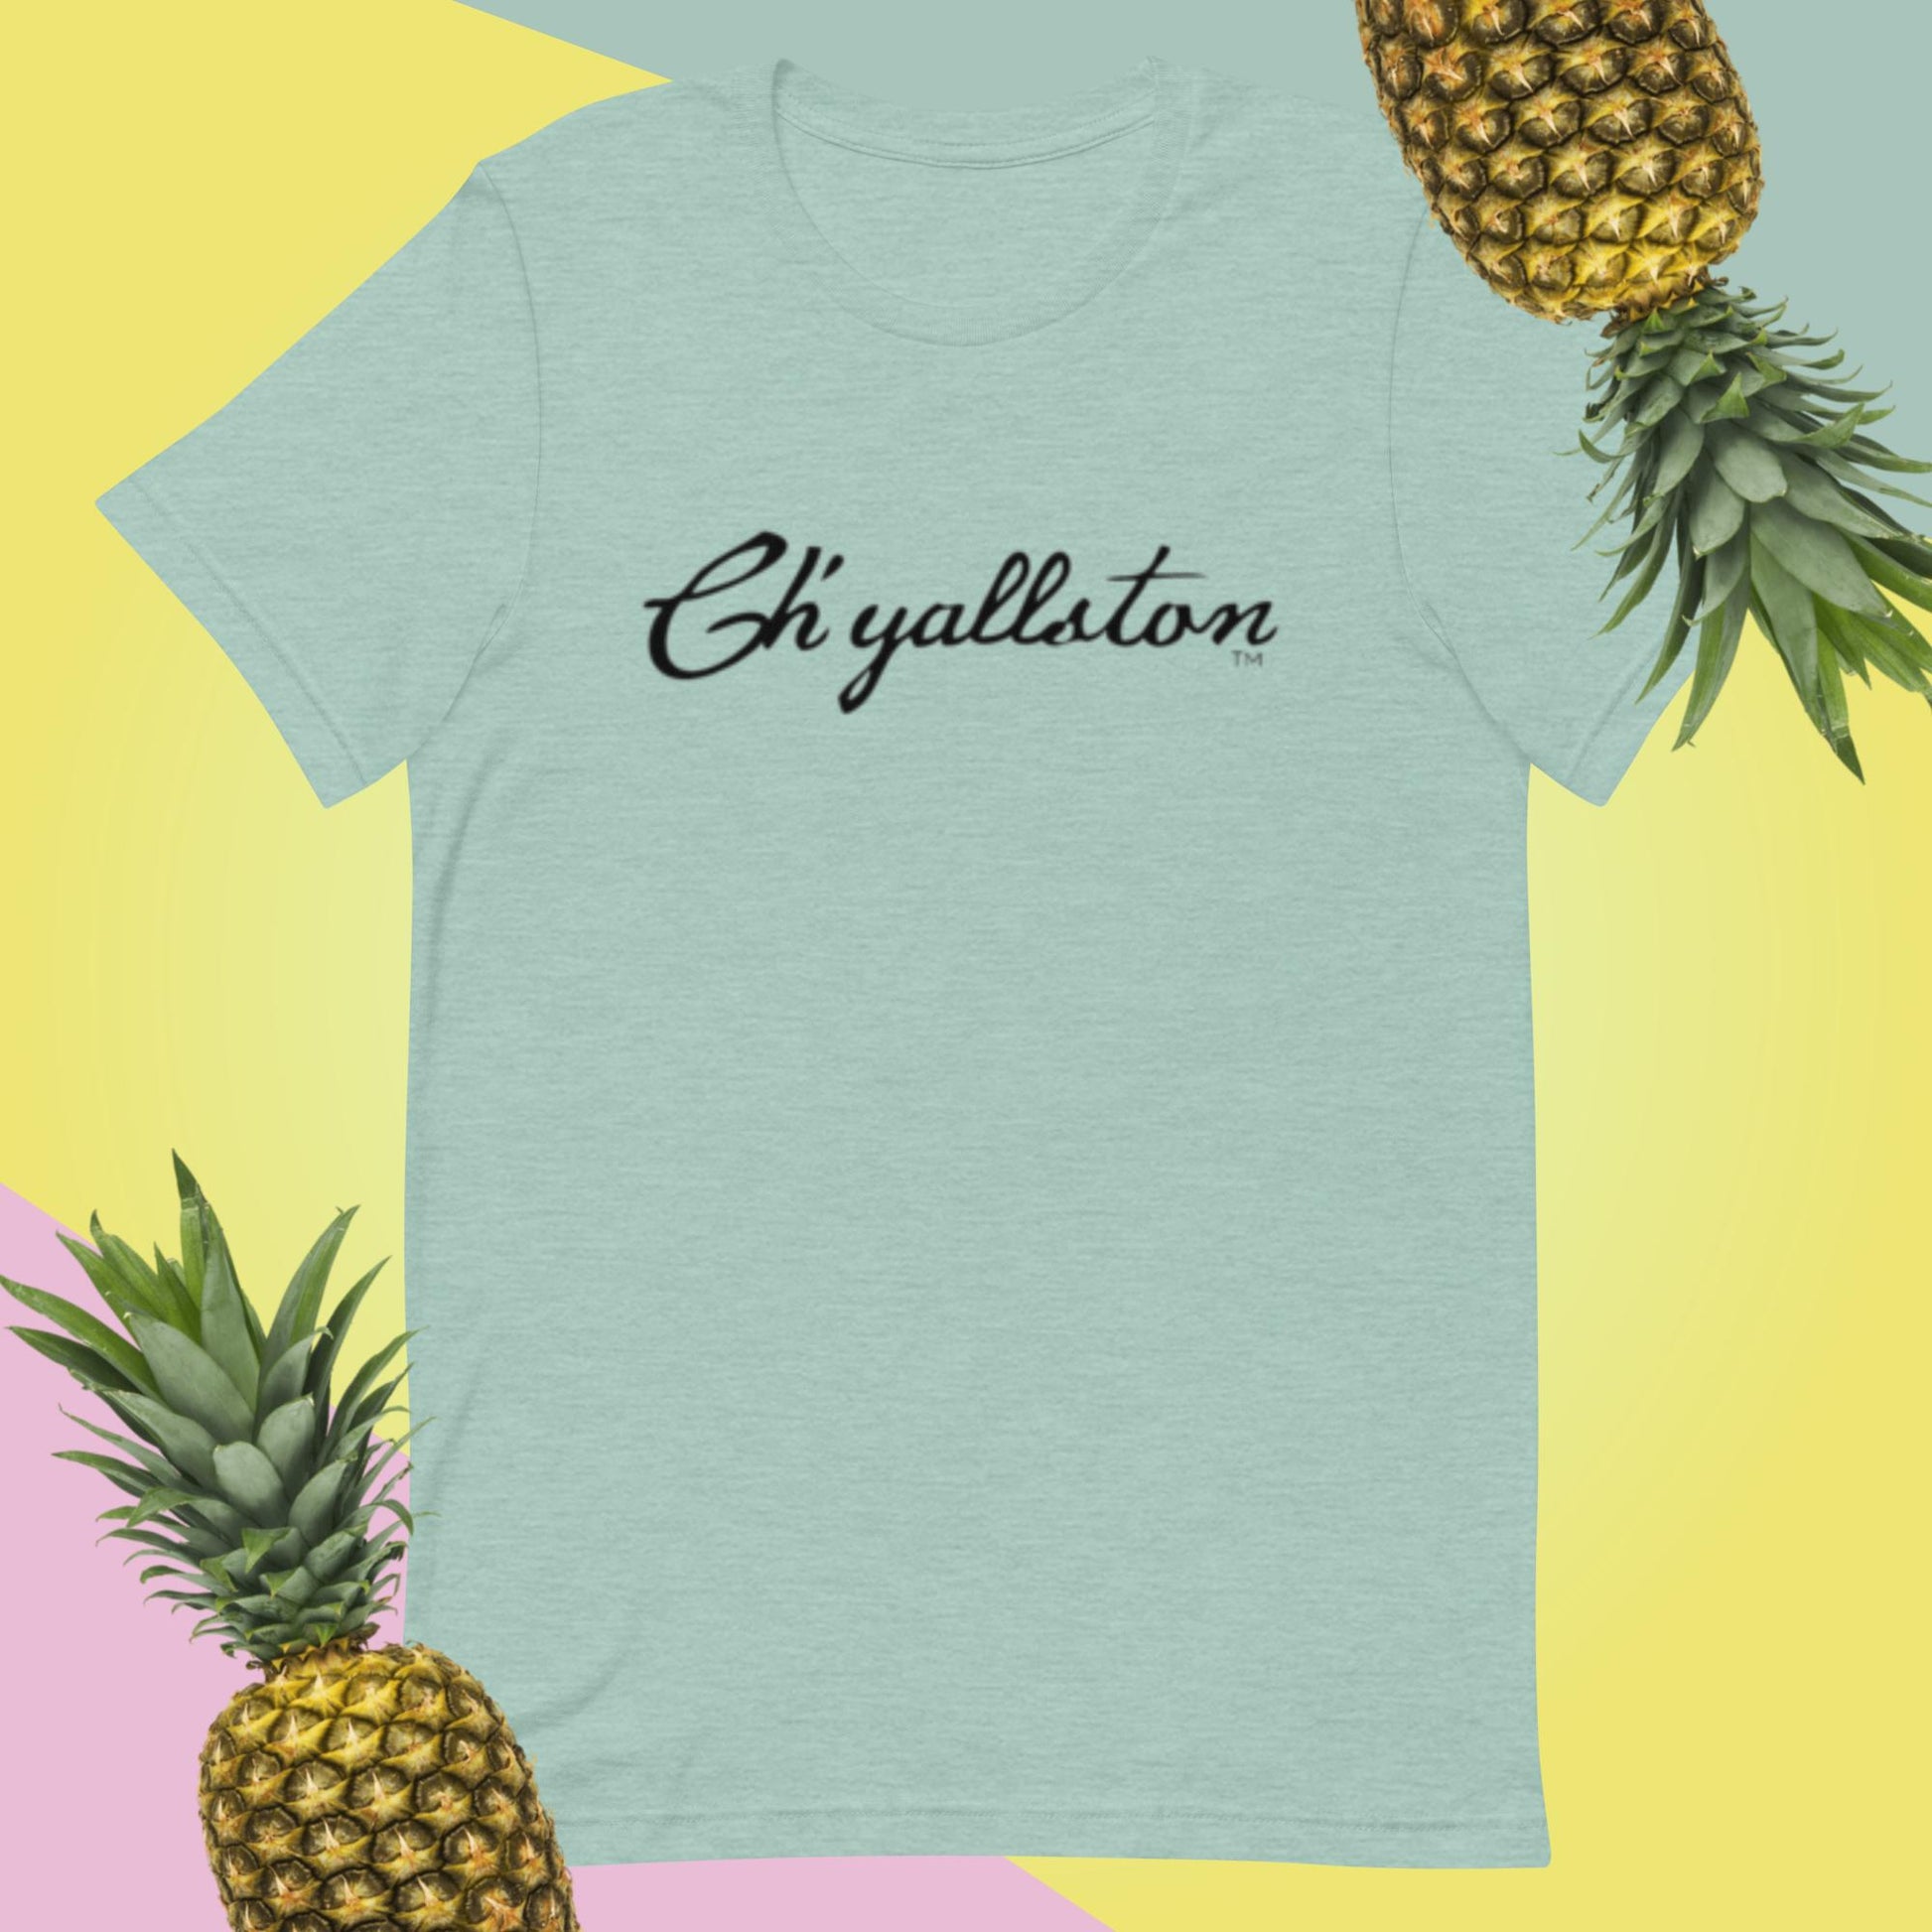 Ch'yallston Unisex T-shirt with Black Lettering - Pluff Mud Mercantile